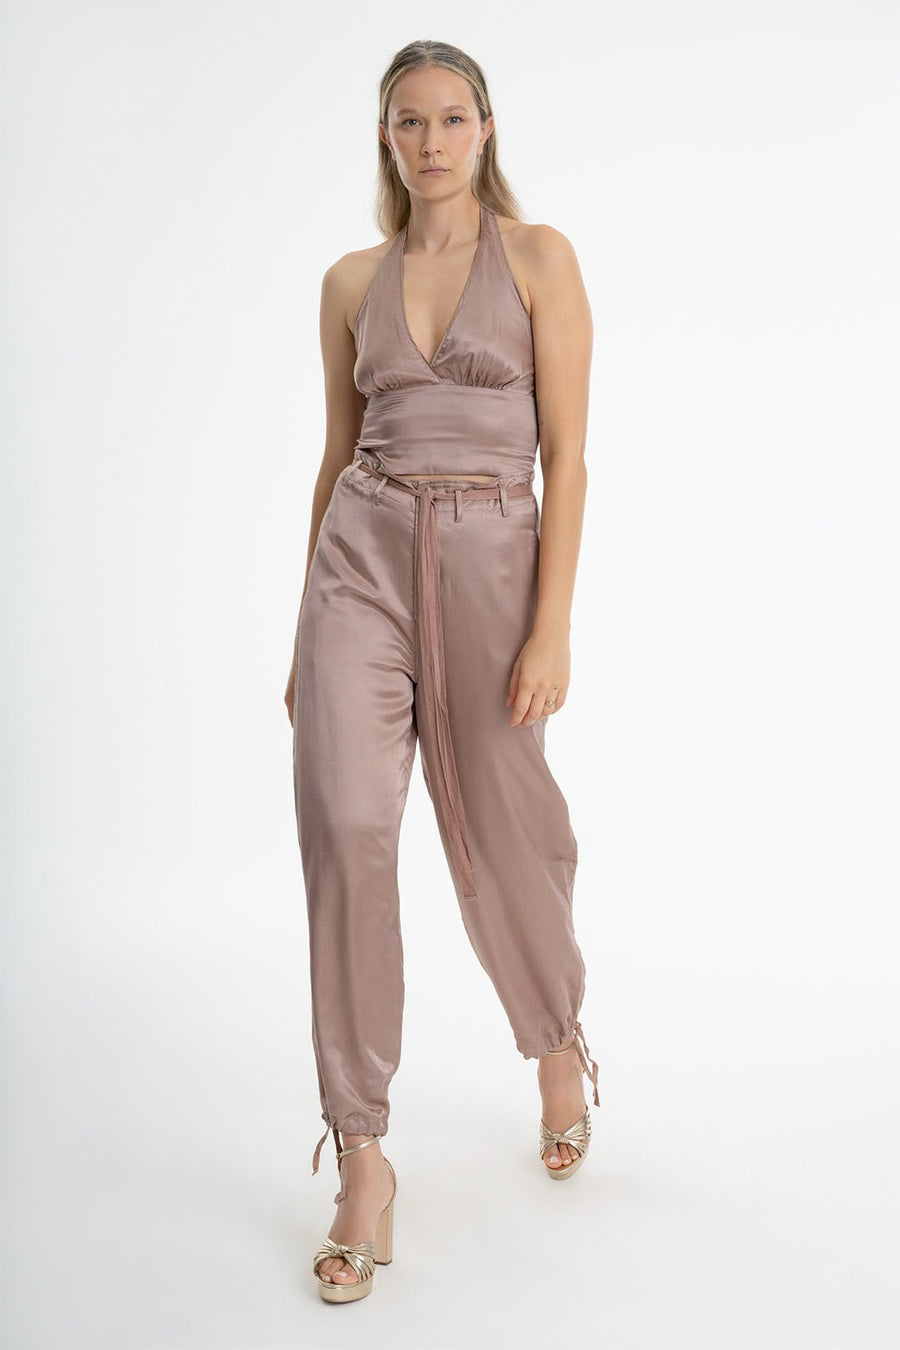 VALENTINE CINCHED PANTS, ORCHID - Burning Torch Online Boutique